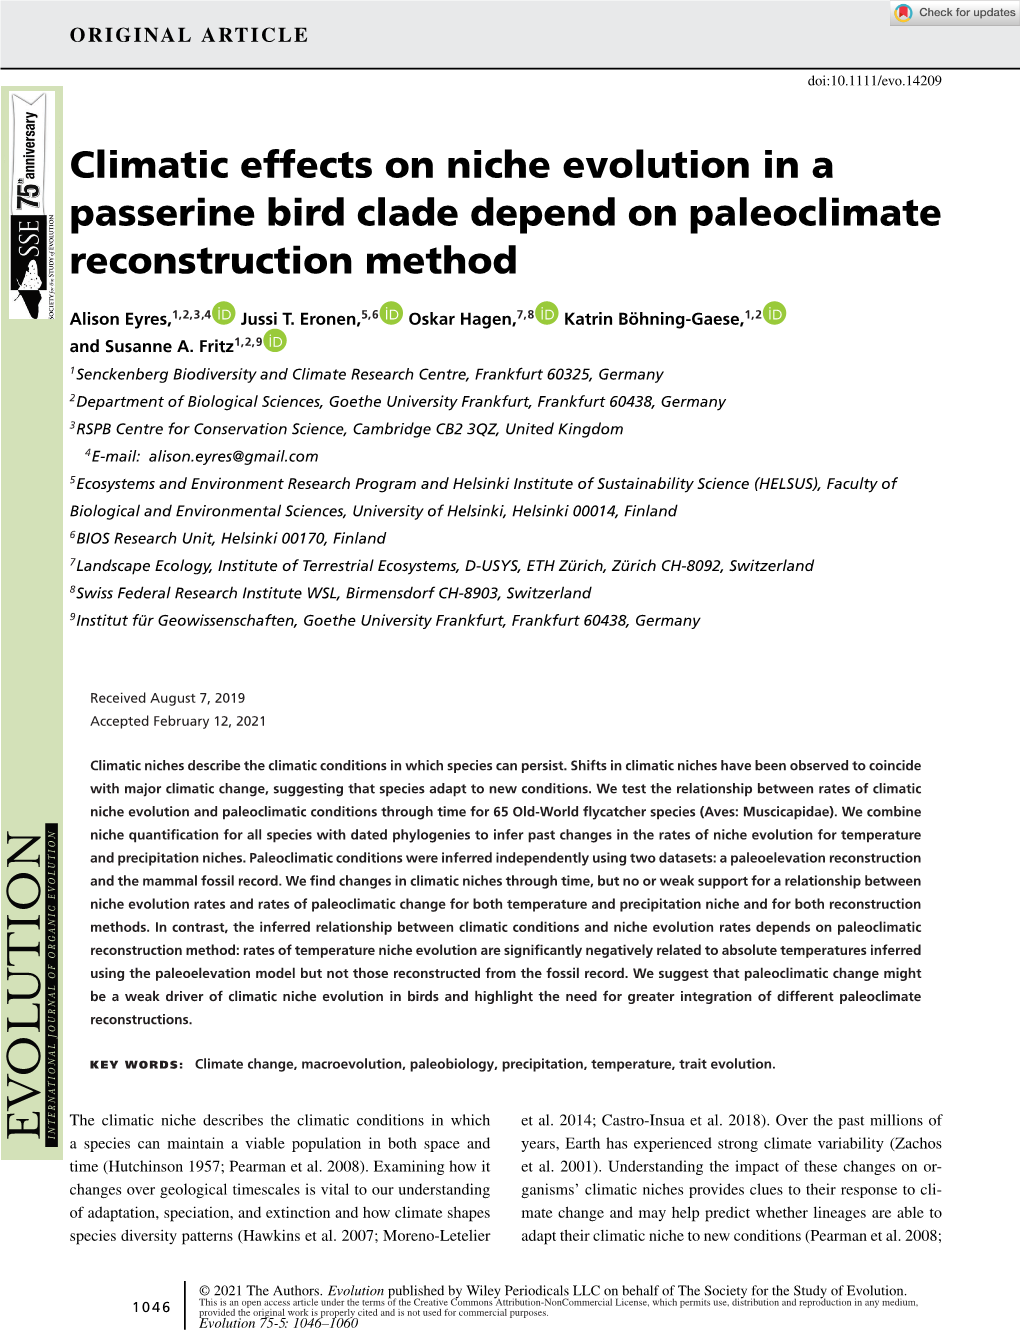 Climatic Effects on Niche Evolution in a Passerine Bird Clade Depend on Paleoclimate Reconstruction Method